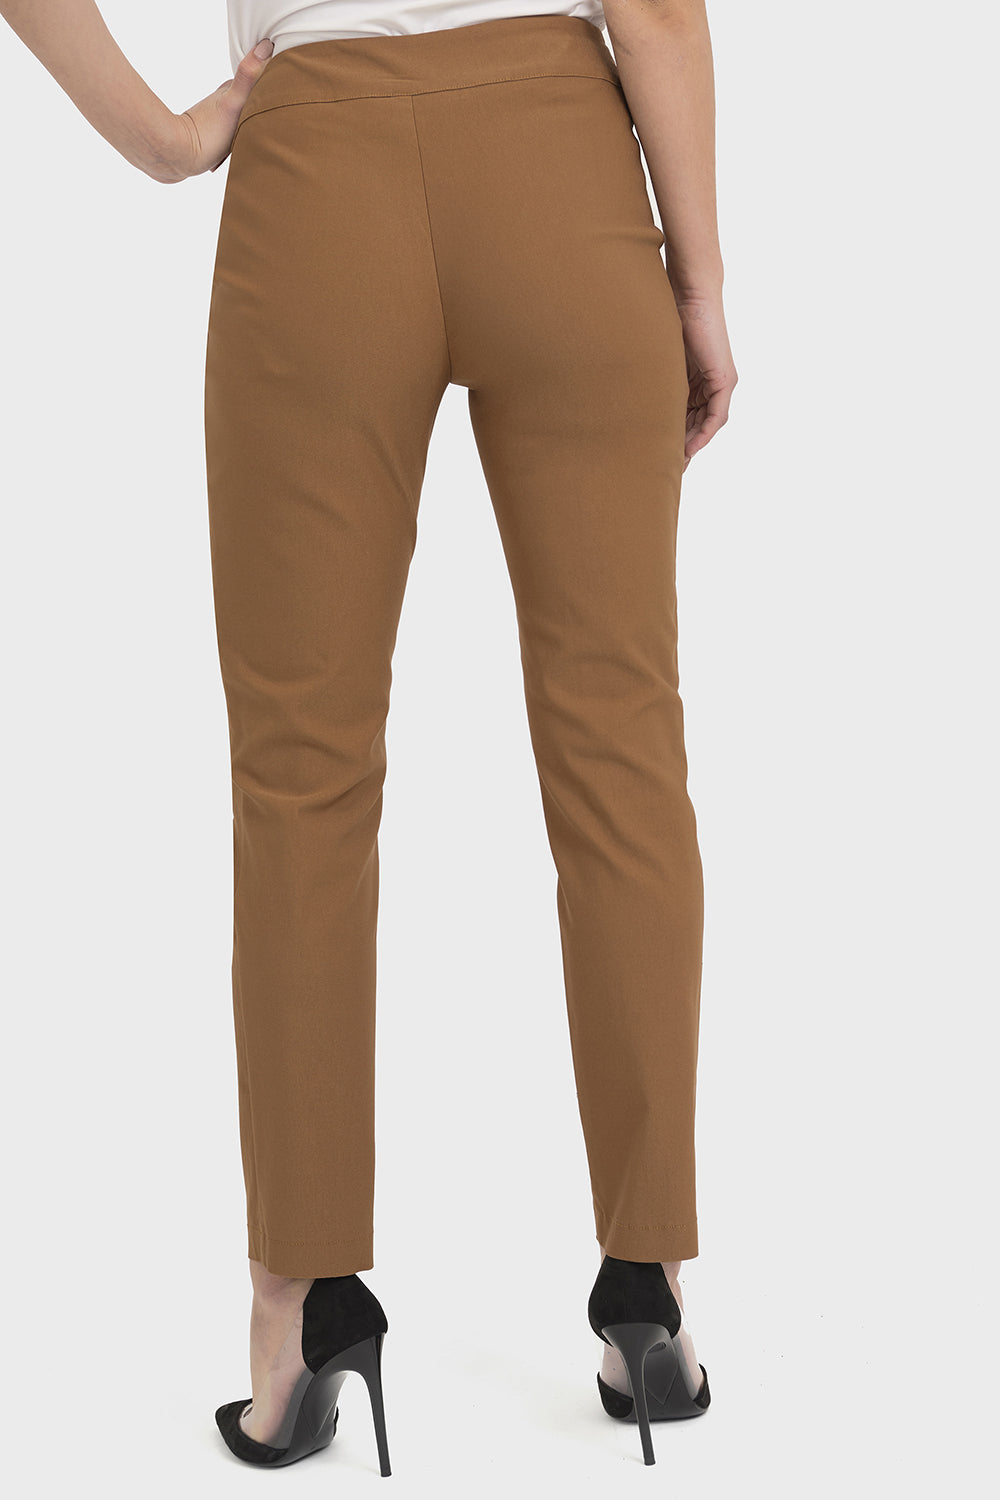 Joseph Ribkoff Style Cut-Out Detail Capris Style 211113 – Luxetire